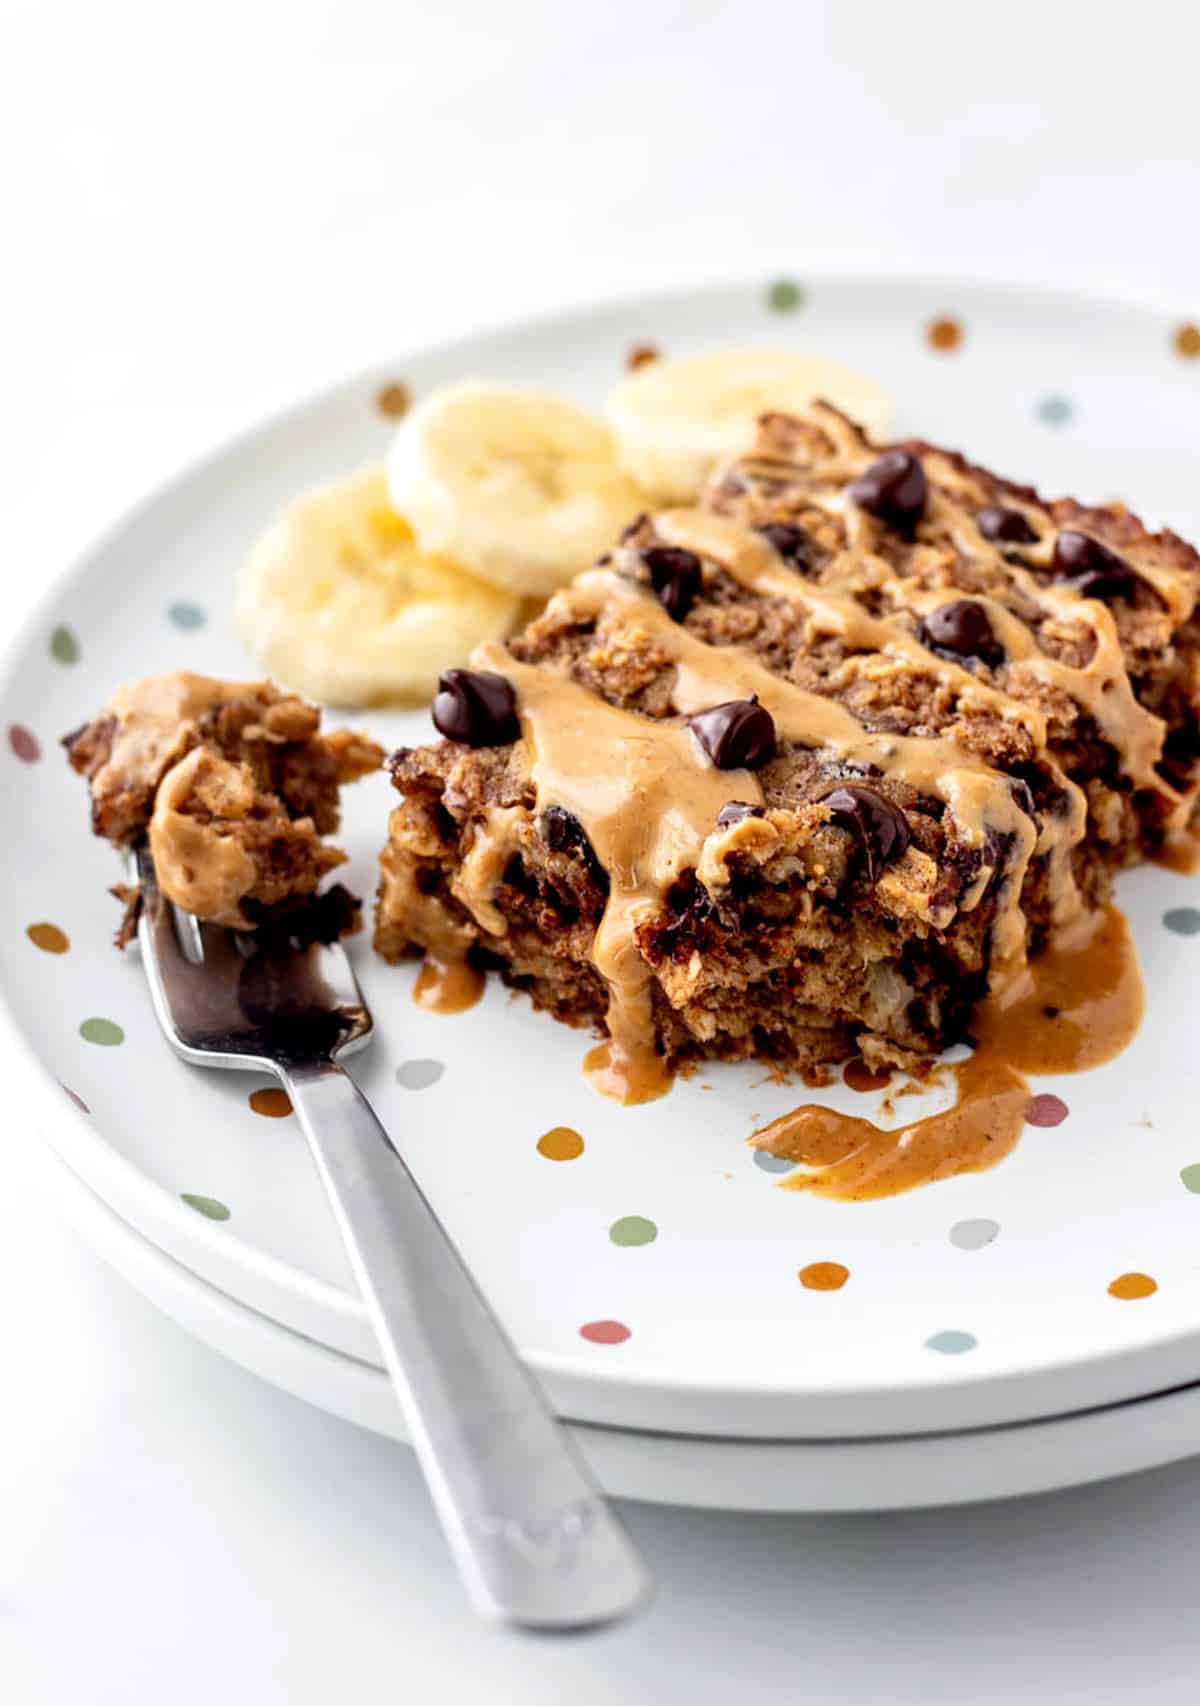 A slice of baked oatmeal with chocolate chips, peanut butter and banana slices.